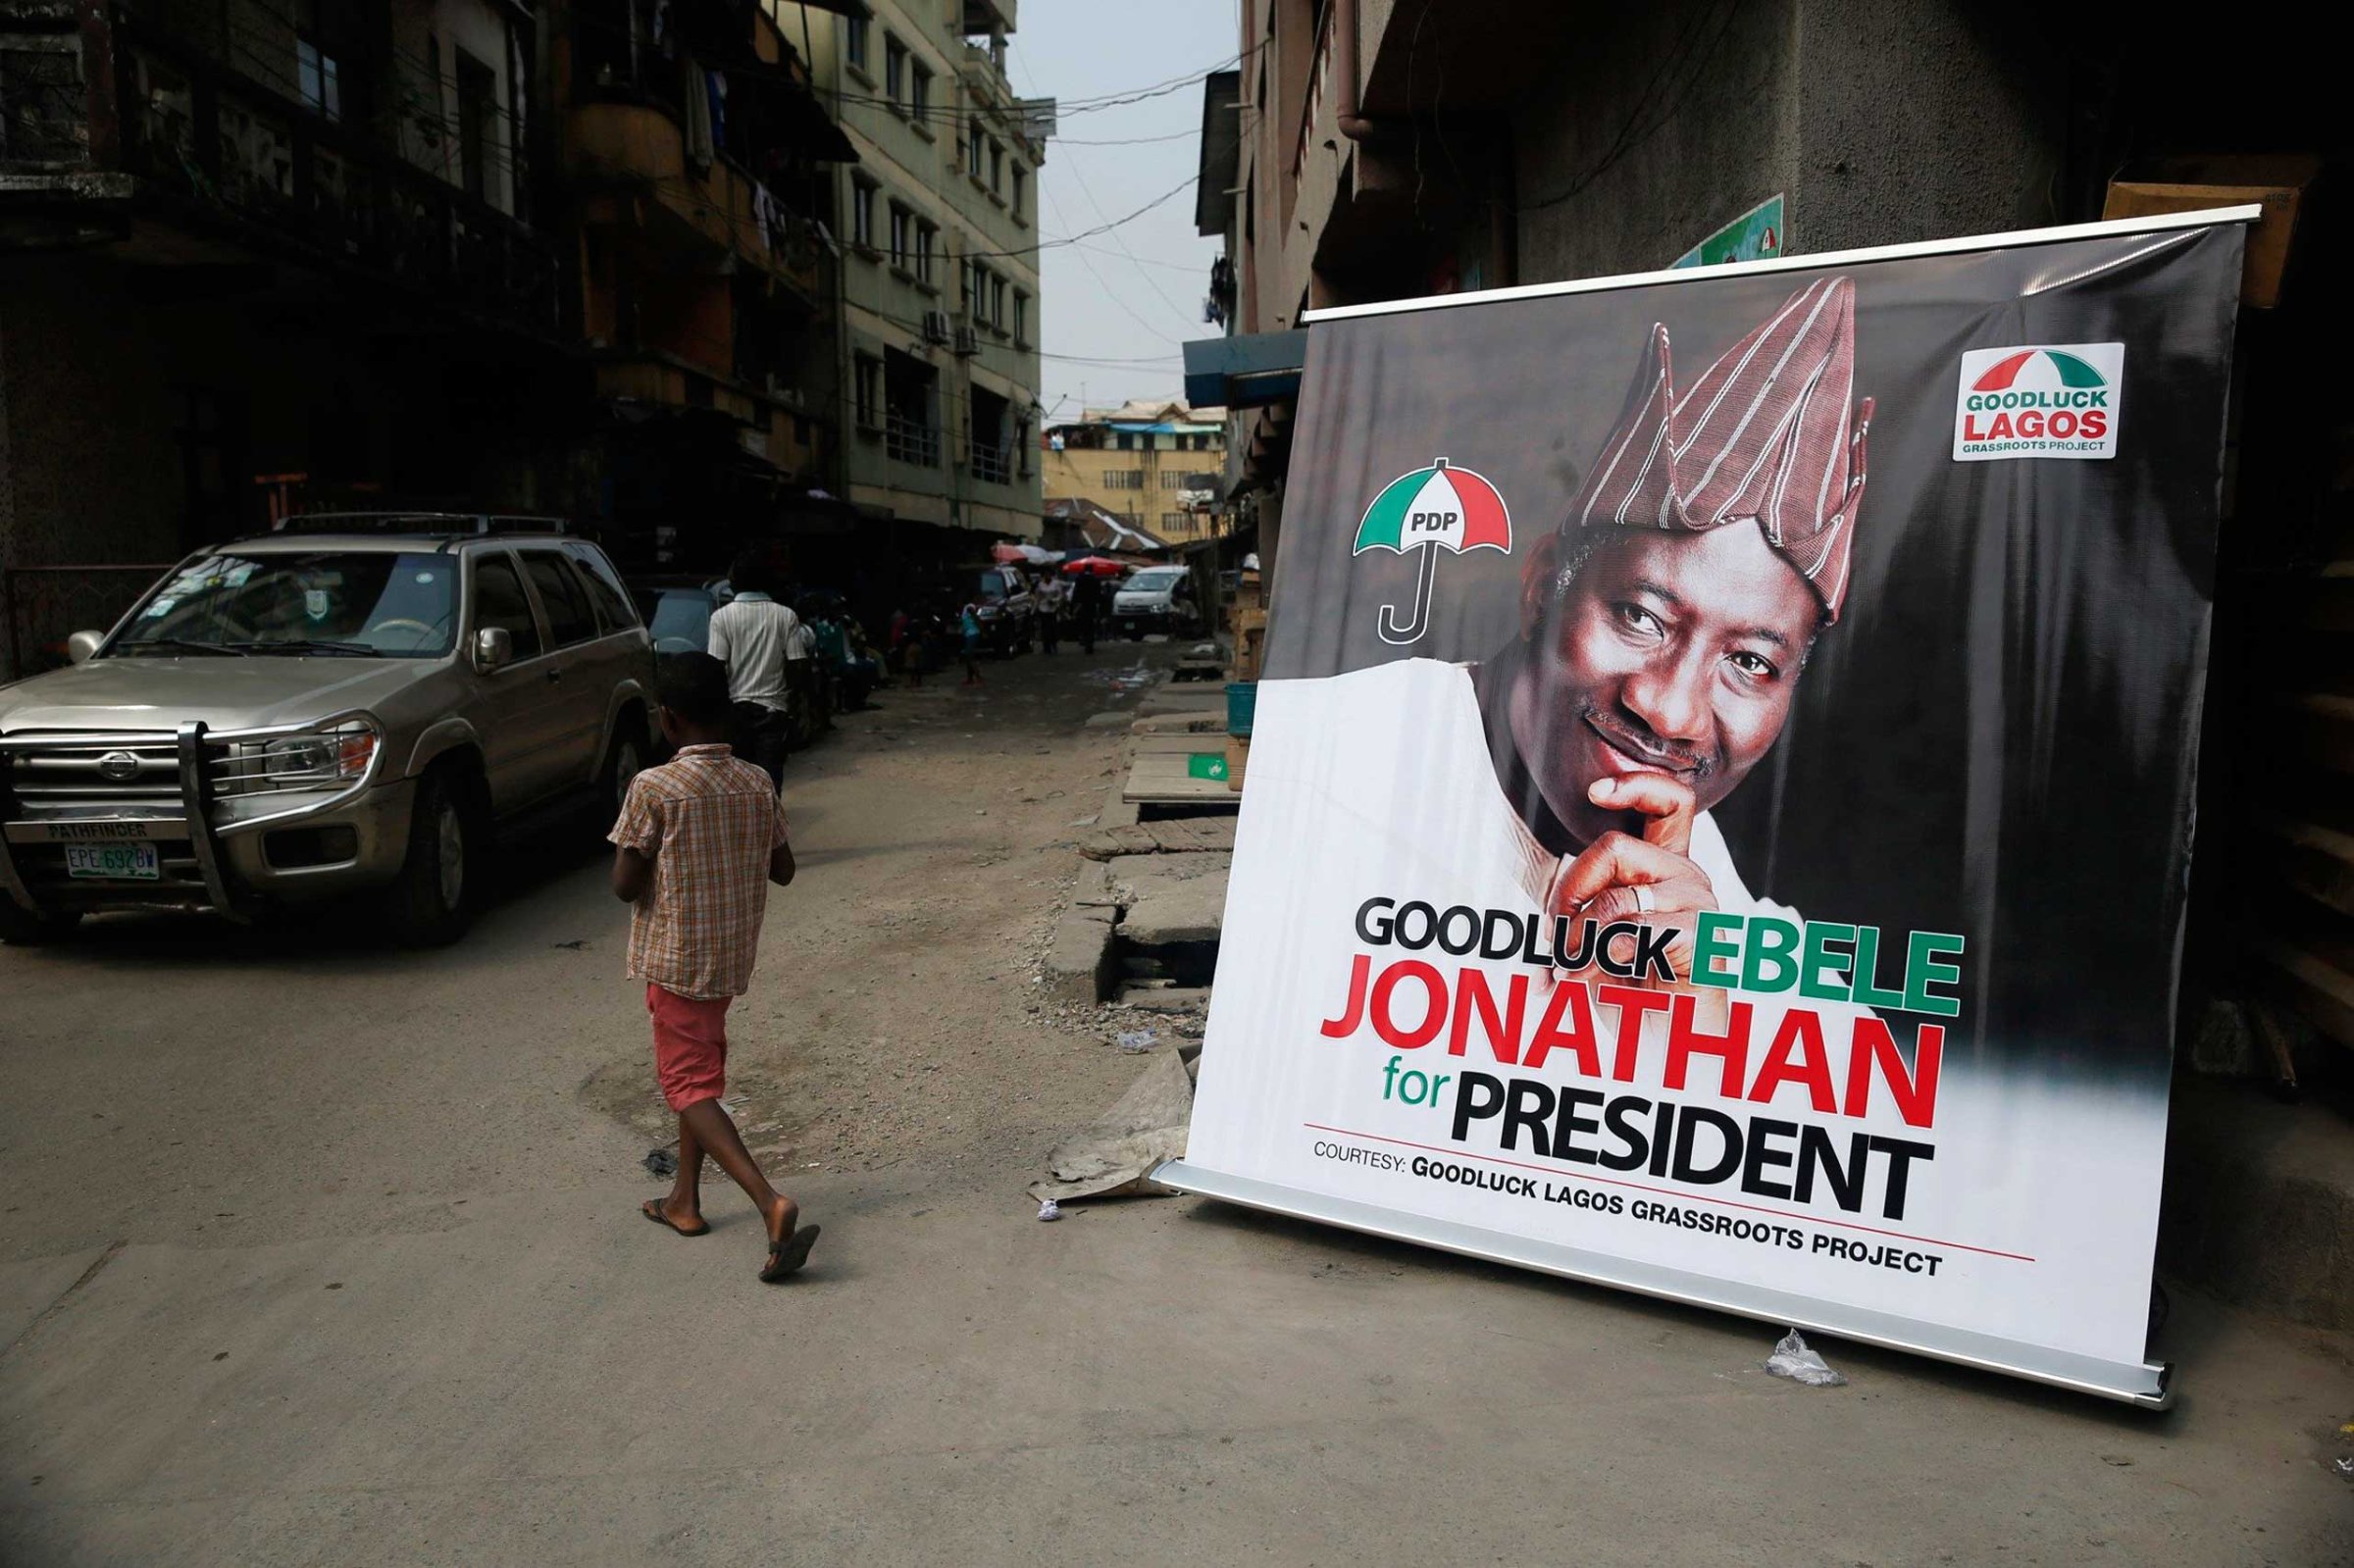 A boy walks near a banner campaigning for Nigeria's President Goodluck Jonathan along a street at Campus Square neighborhood in Lagos, Feb. 2, 2015.